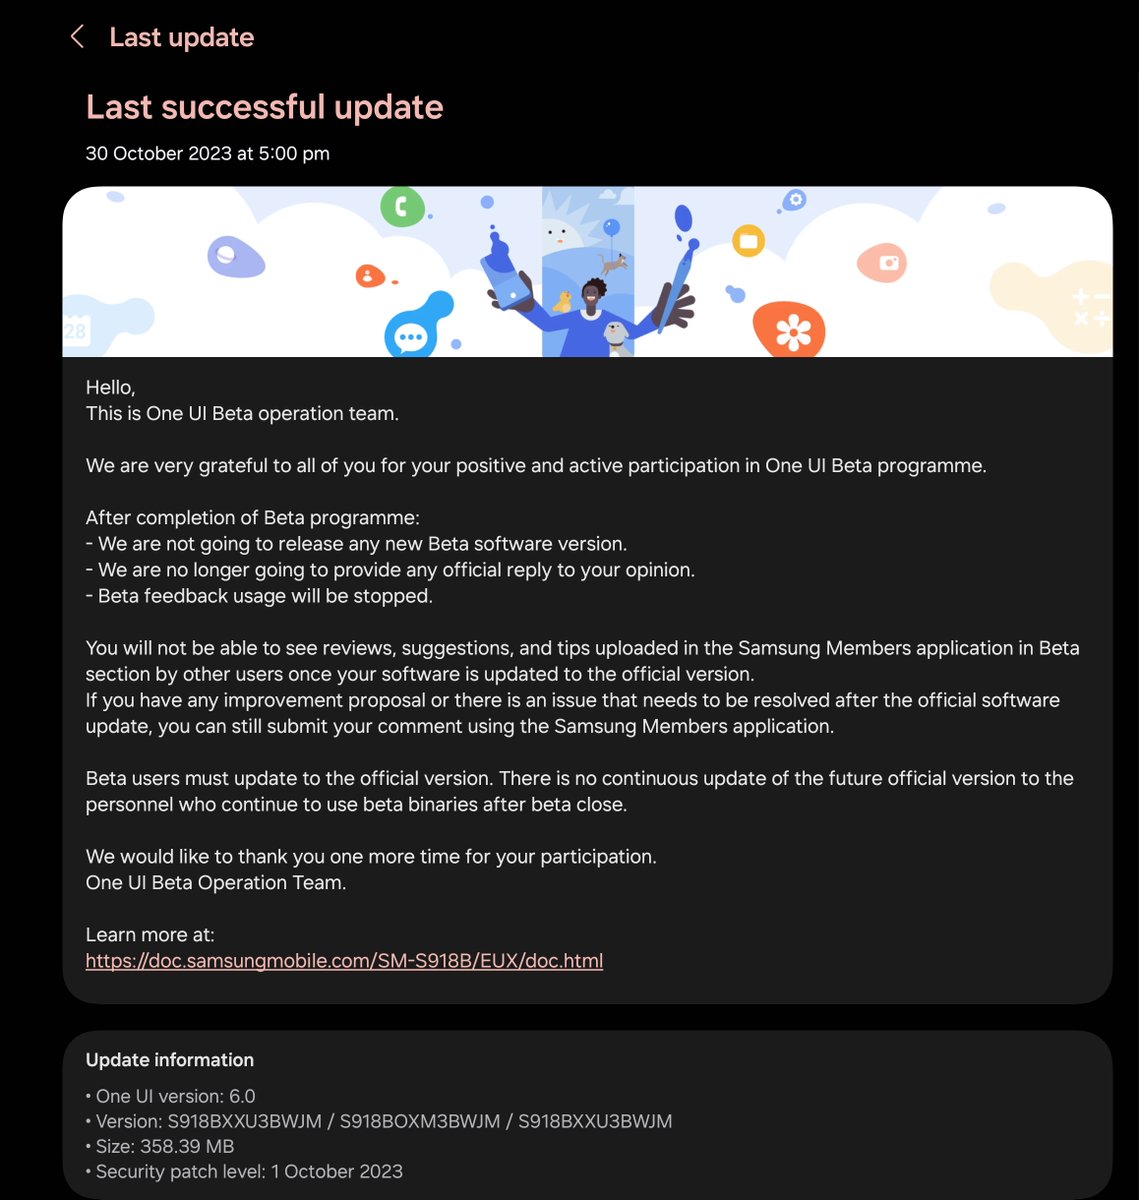 Breaking News 🎊 🎊 One UI 6.0 Android 14 🚀 Stable Update Is Available In Germany 🇩🇪 ⚠️ Only For Beta Users Build: S918BXXU3BWJM/S918BOXM3BWJM/S918BXXU3BWJM Size: 358.39 MB Security Patch Level: 1 October 2023 🔐 #OneUI #OneUI6 #GalaxyS23 #GalaxyS23Plus #GalaxyS23Ultra